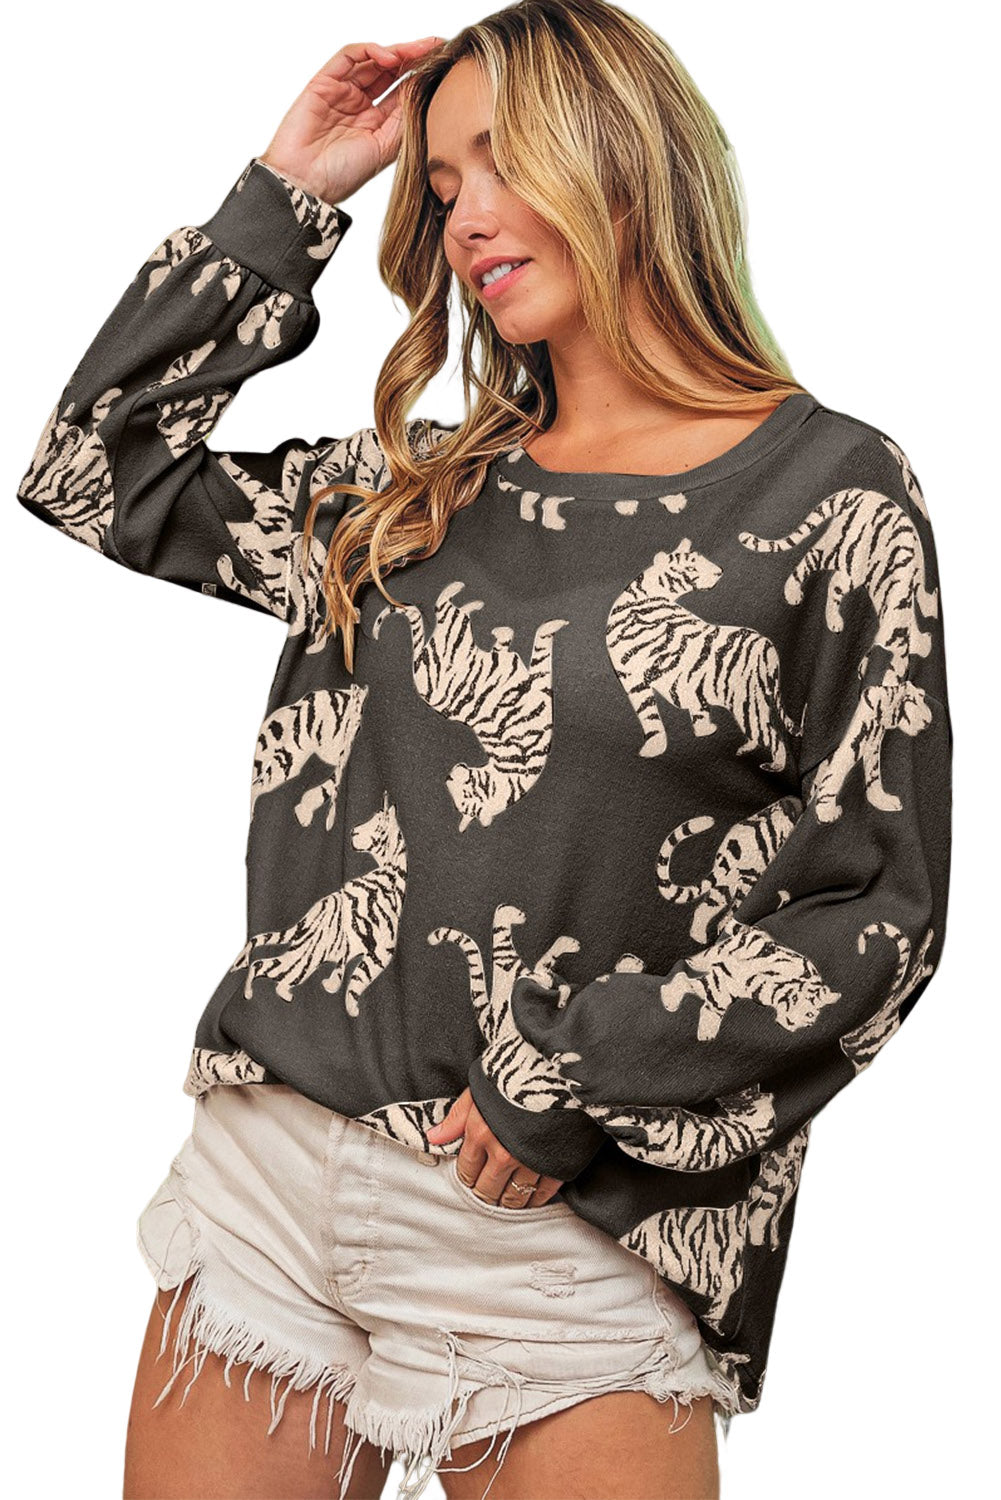 Lively Tiger Print Casual Sweatshirt